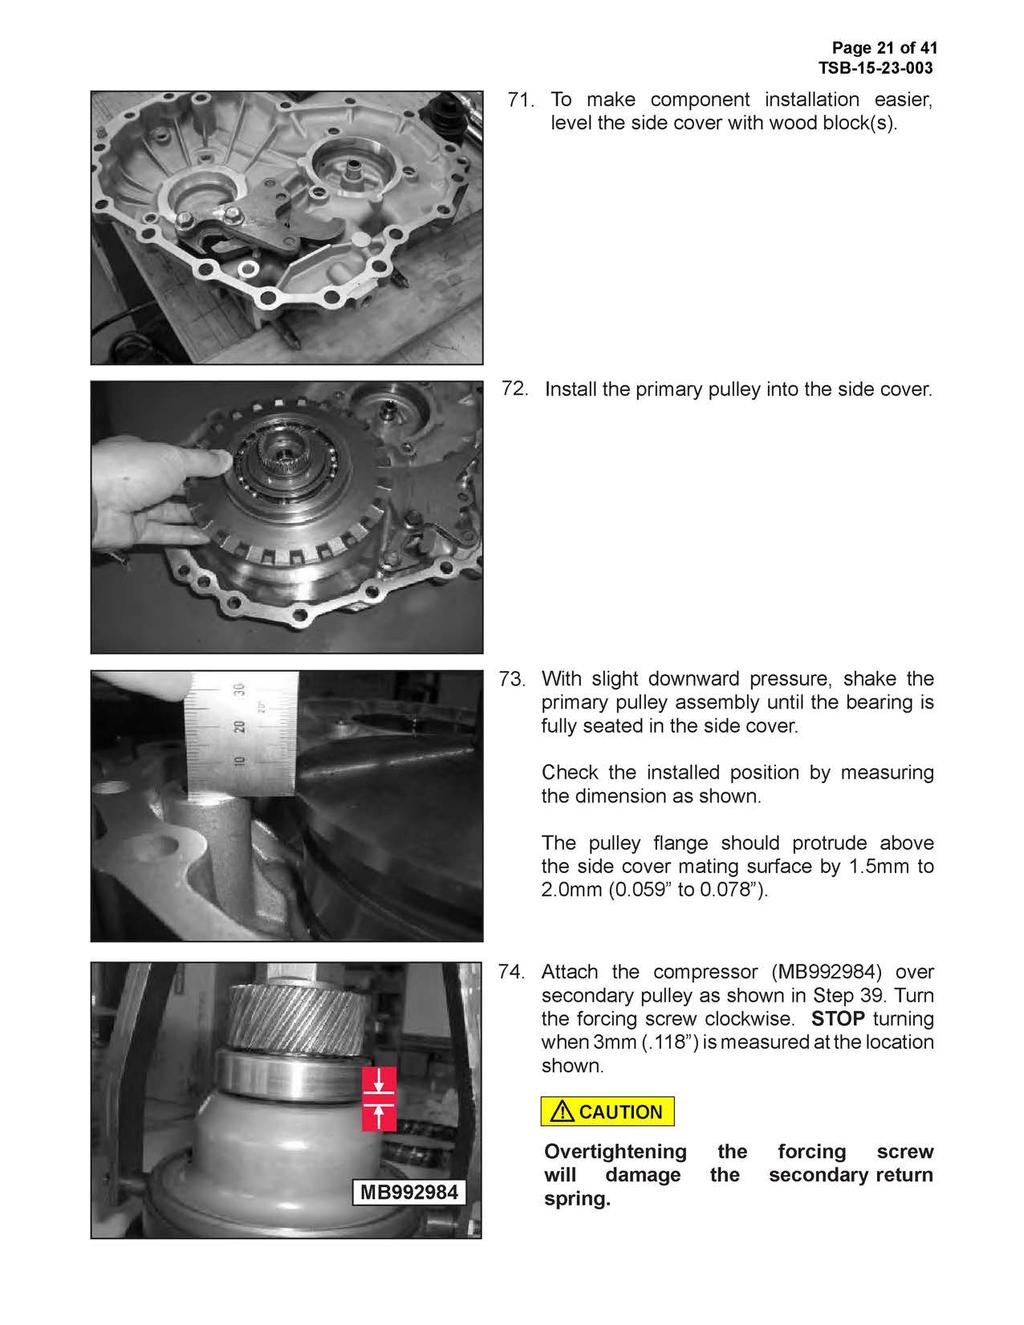 Page 21 of 41 71. To make component installation easier, level the side cover with wood block( s ). 72. Install the primary pulley into the side cover. 73.